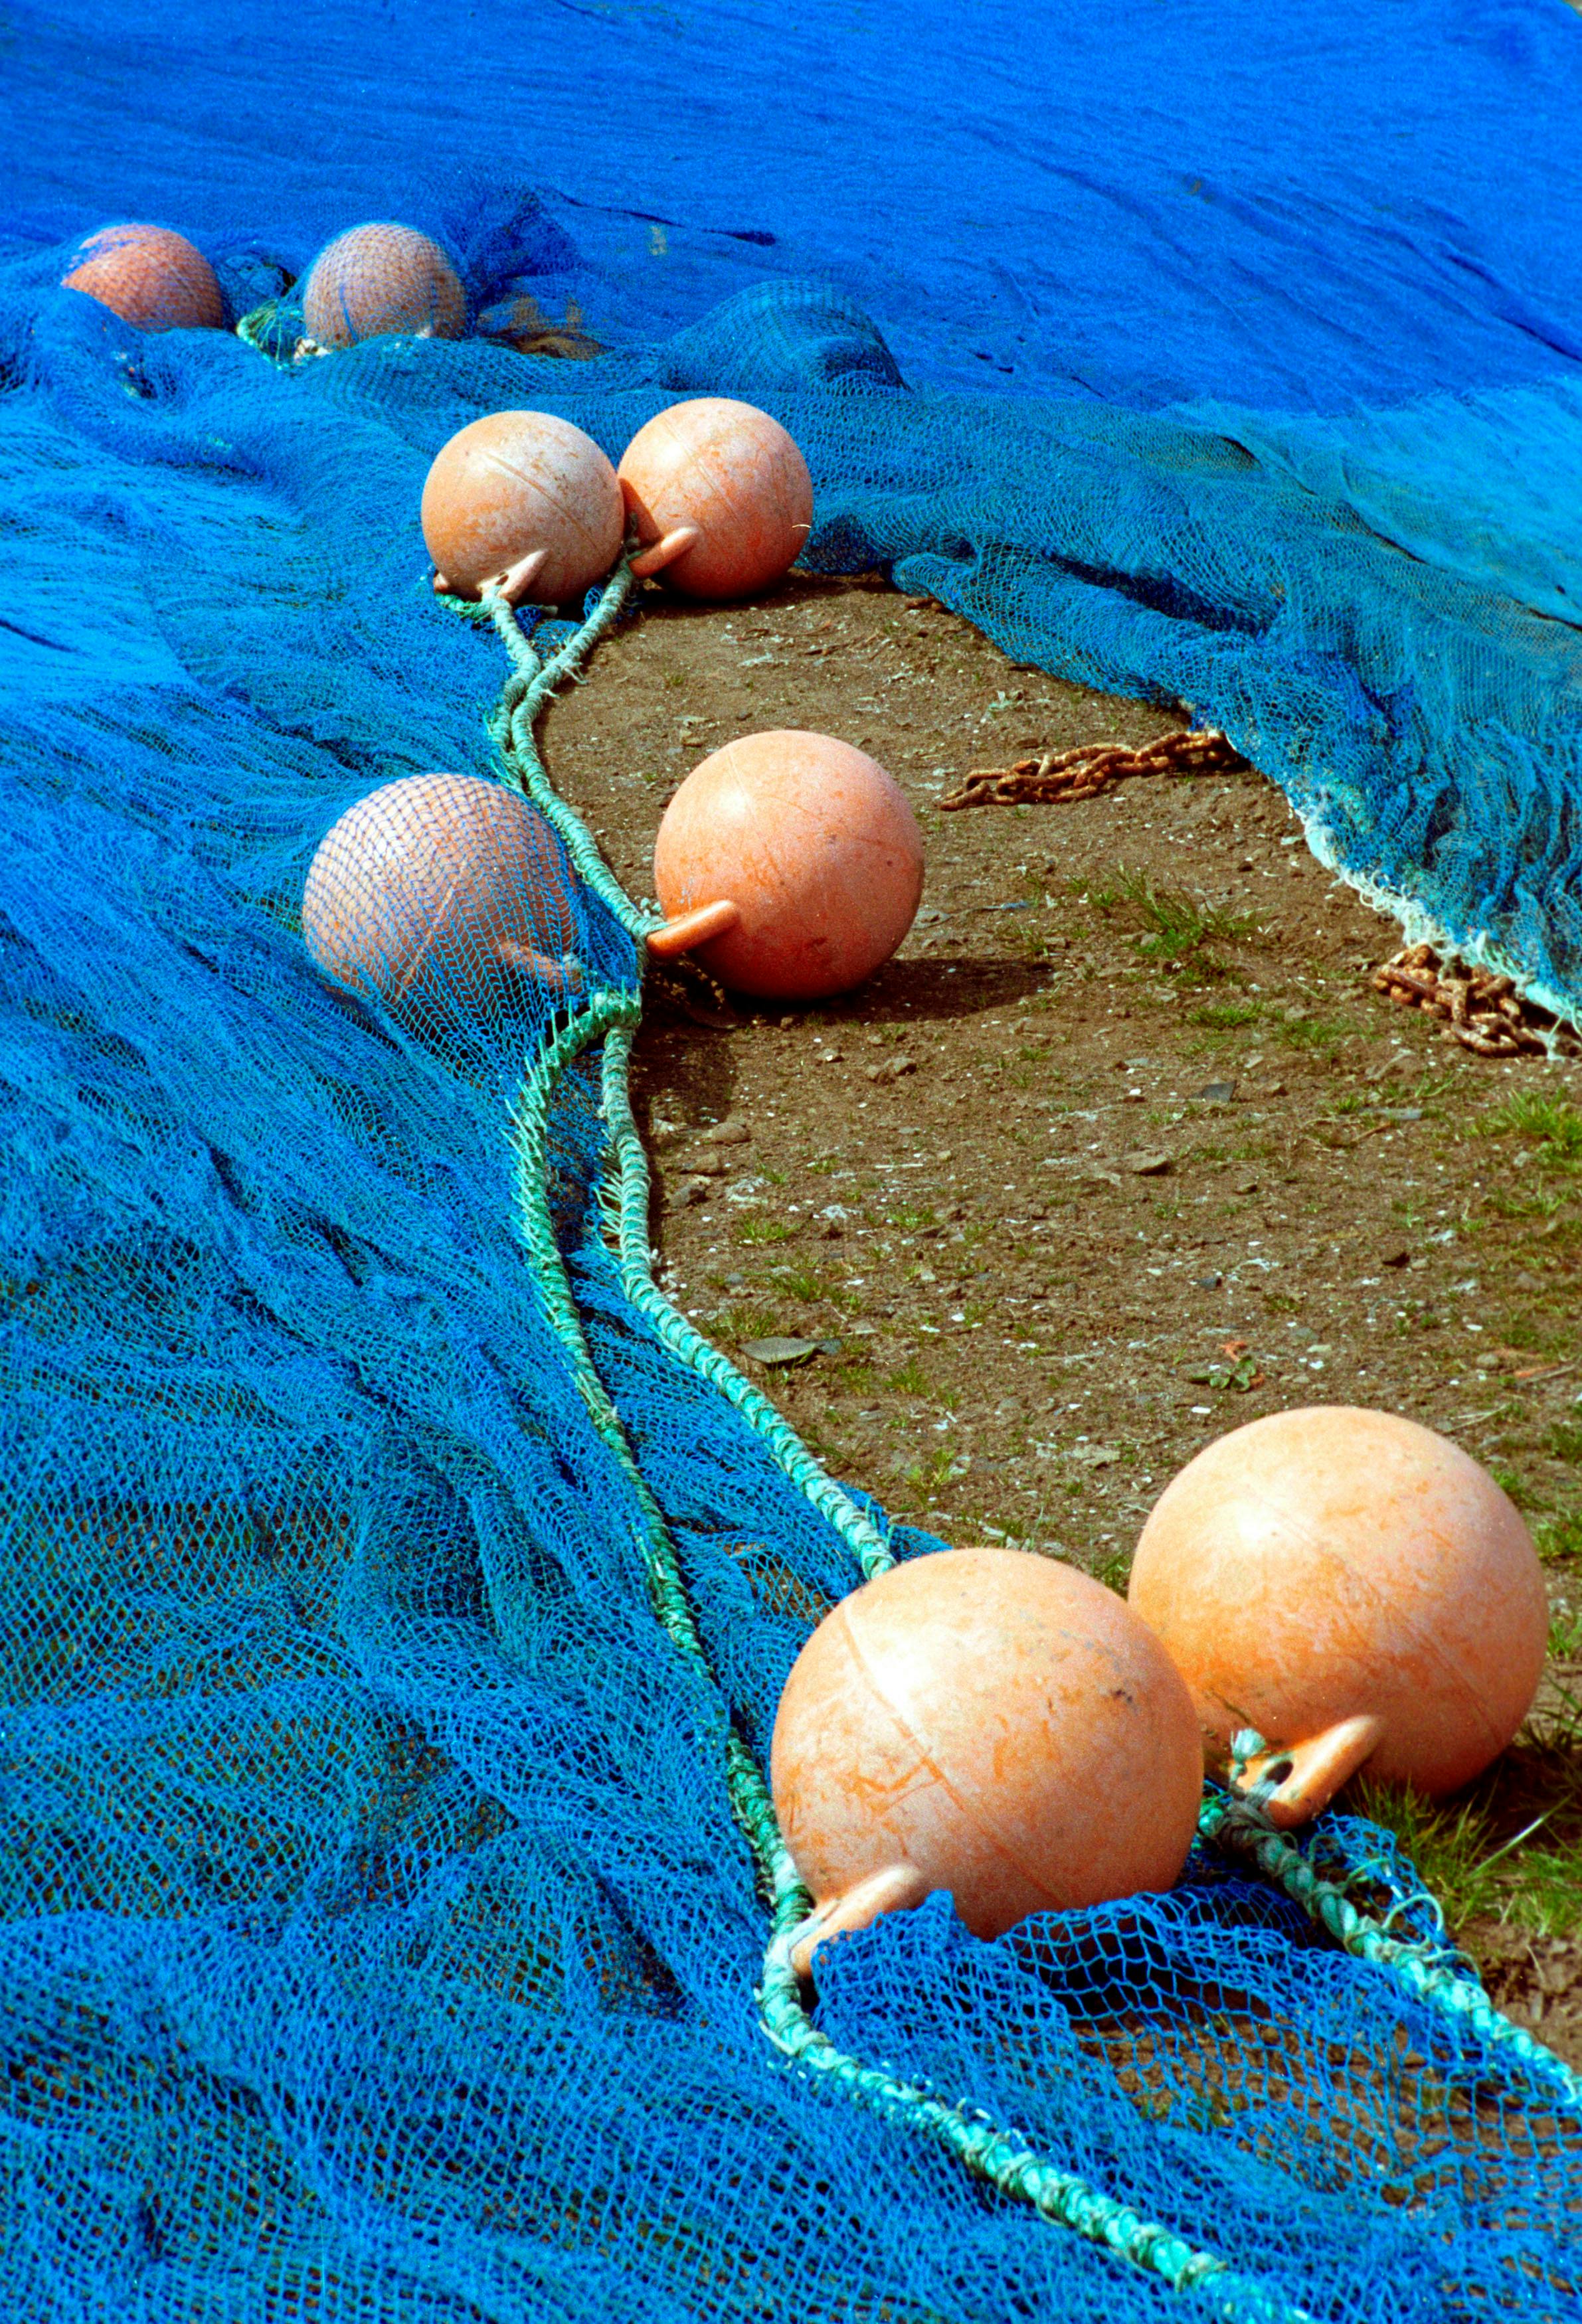 Fishing Net with Plastic Fishing Floats on the Ground · Free Stock Photo